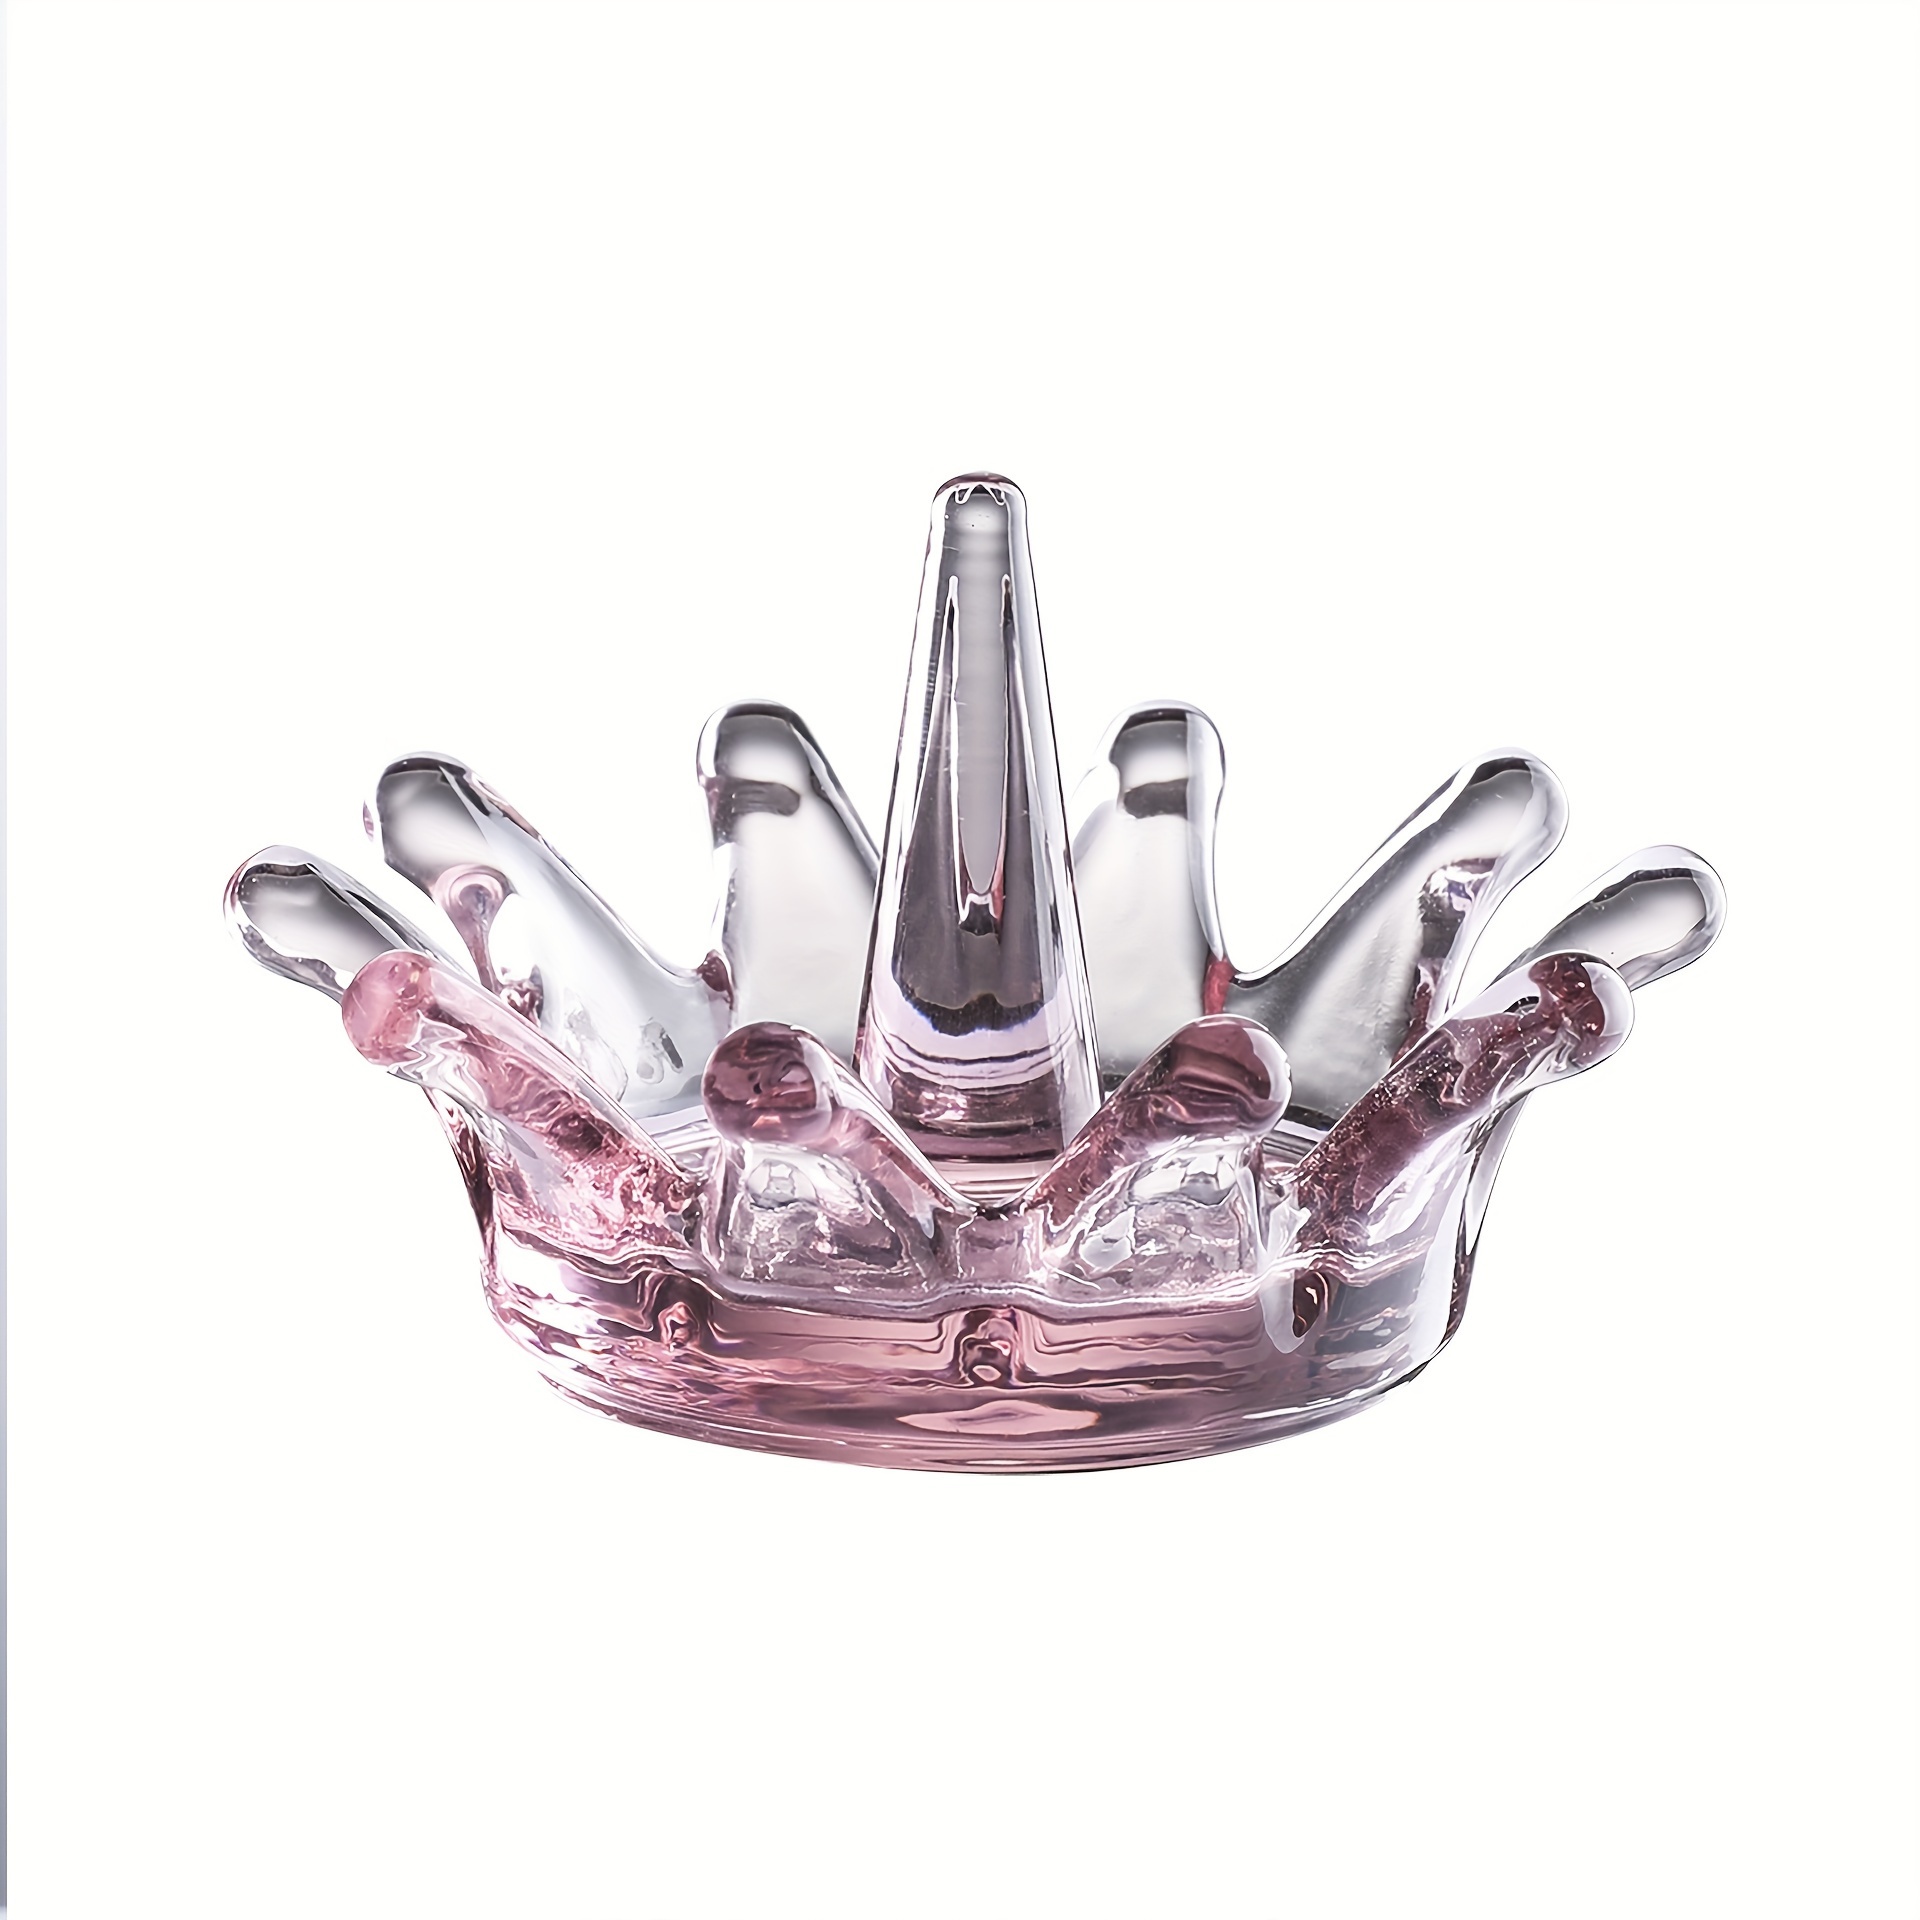 

1pc Crown Shaped Glass Ring Holder, Glass Jewelry Tray, Desktop Jewelry Organizer, Desktop Ornament, Gift For Girls Women Mom, Mother's Day Gift